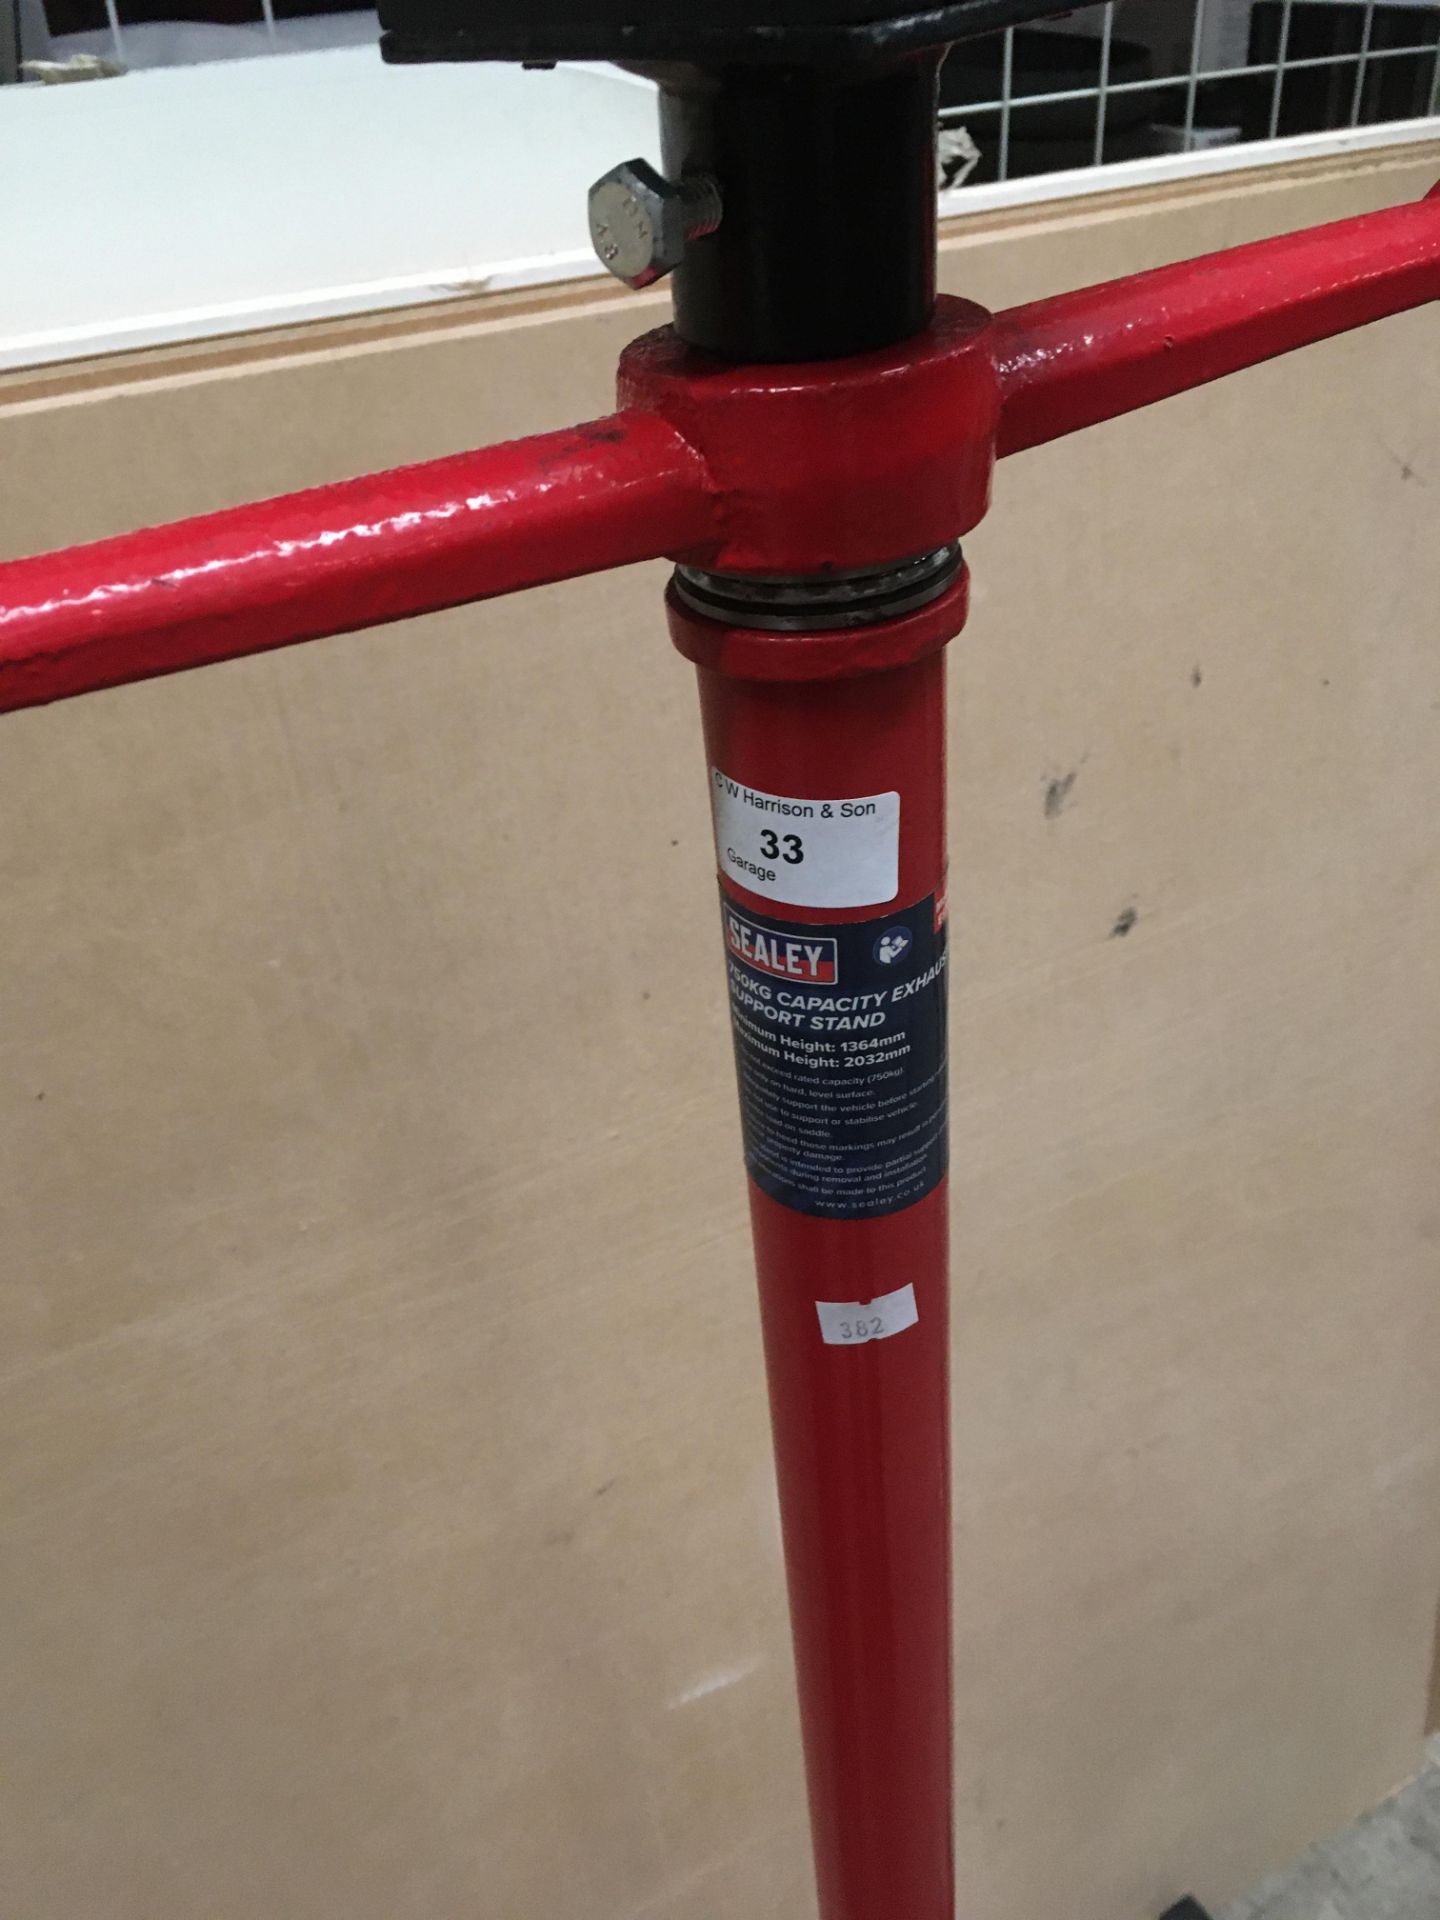 A Sealey 750kg capacity exhaust support stand, min height 1364mm, - Image 2 of 2